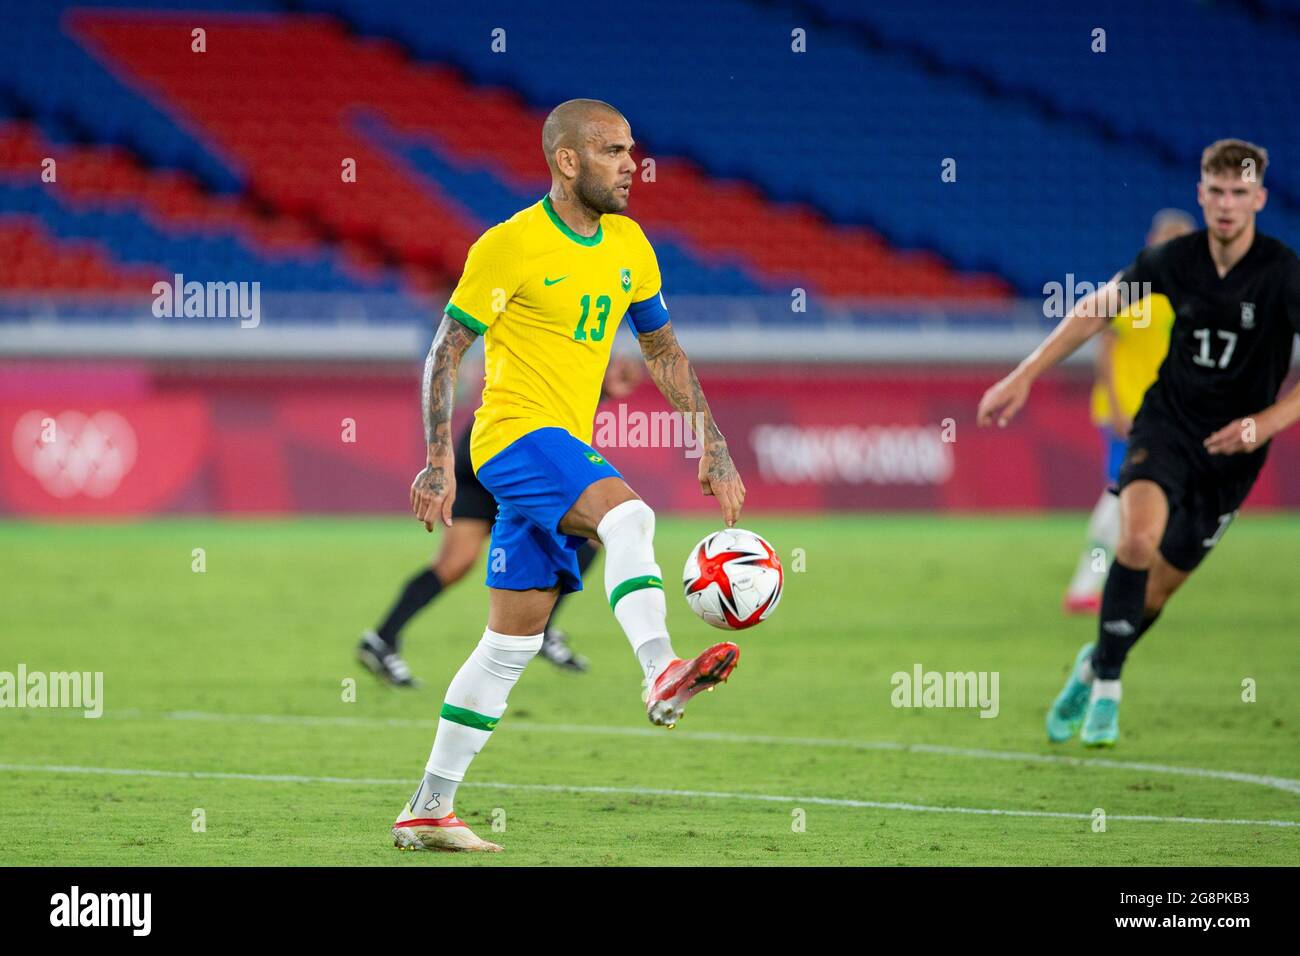 Yokohama, Japan. 22nd July 2021. T'QUIO, TO - 22.07.2021: OLYMPIC GAMES  TOKYO 2020 2021 TOKYO - Dani Alves do Brasil during the soccer game between  Brazil and Germany at the Tokyo 2020